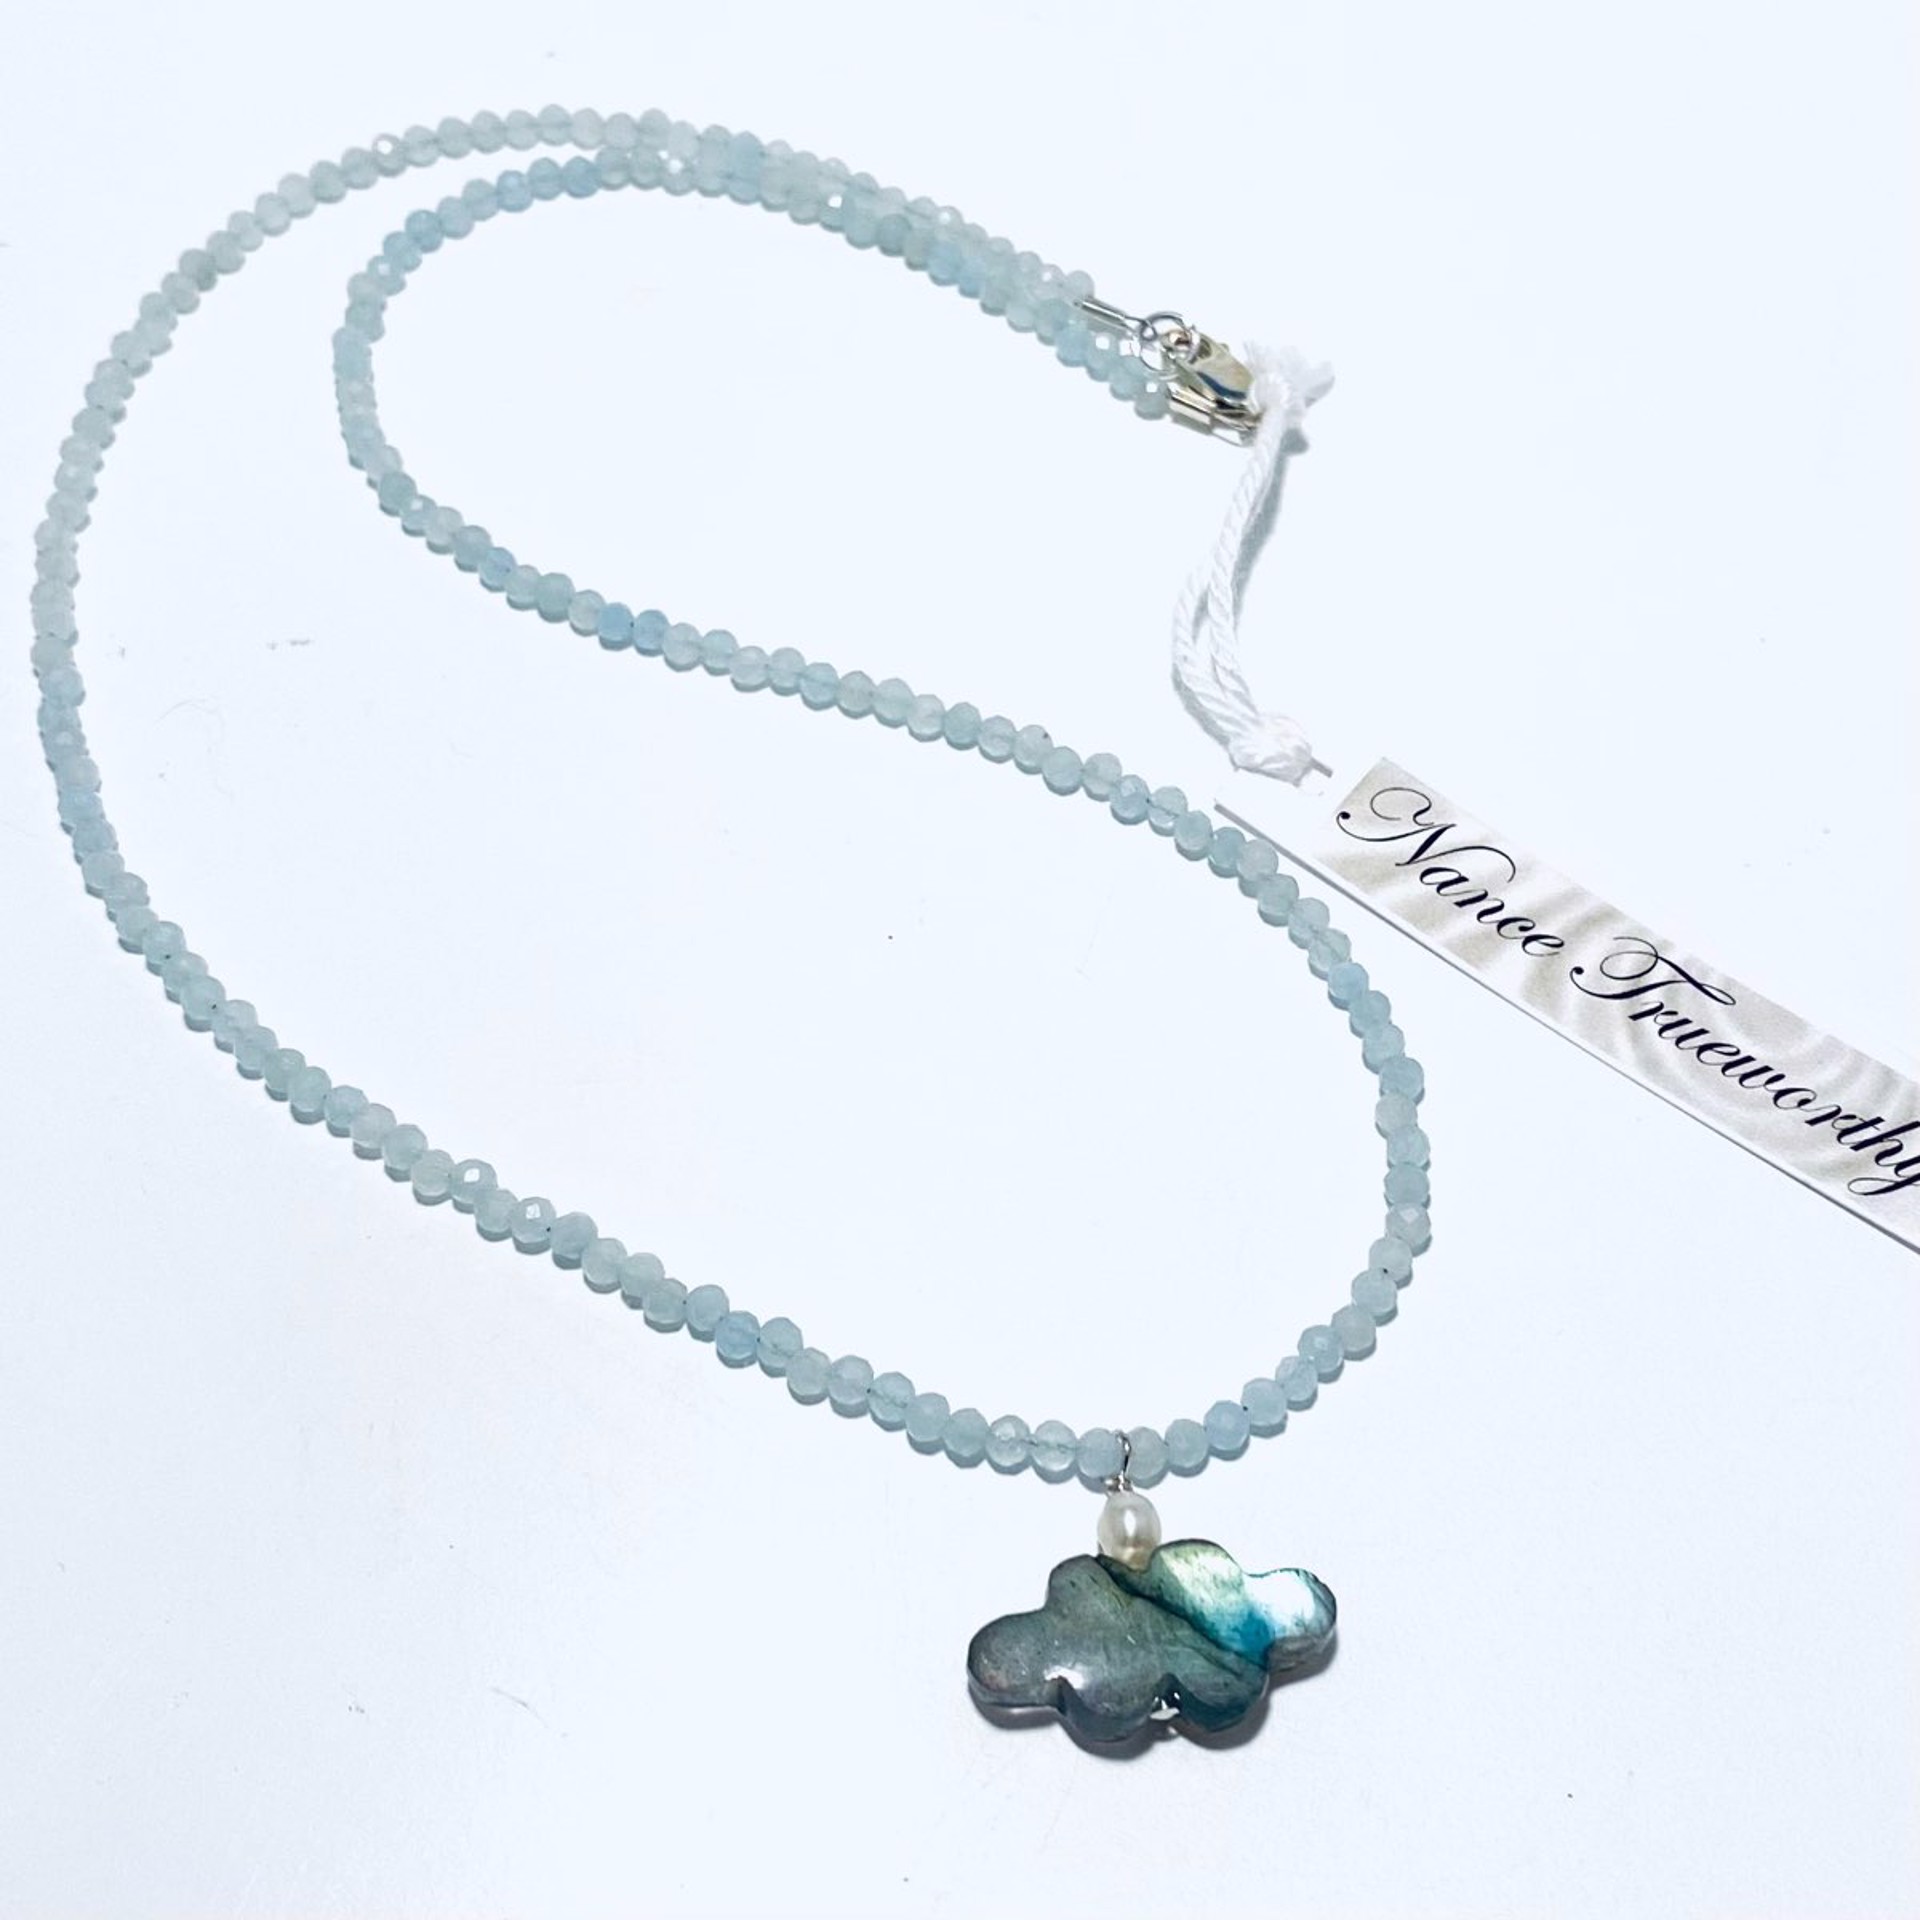 NT22-193 Faceted Aquamarine Labradorite Cloud Drop Necklace by Nance Trueworthy